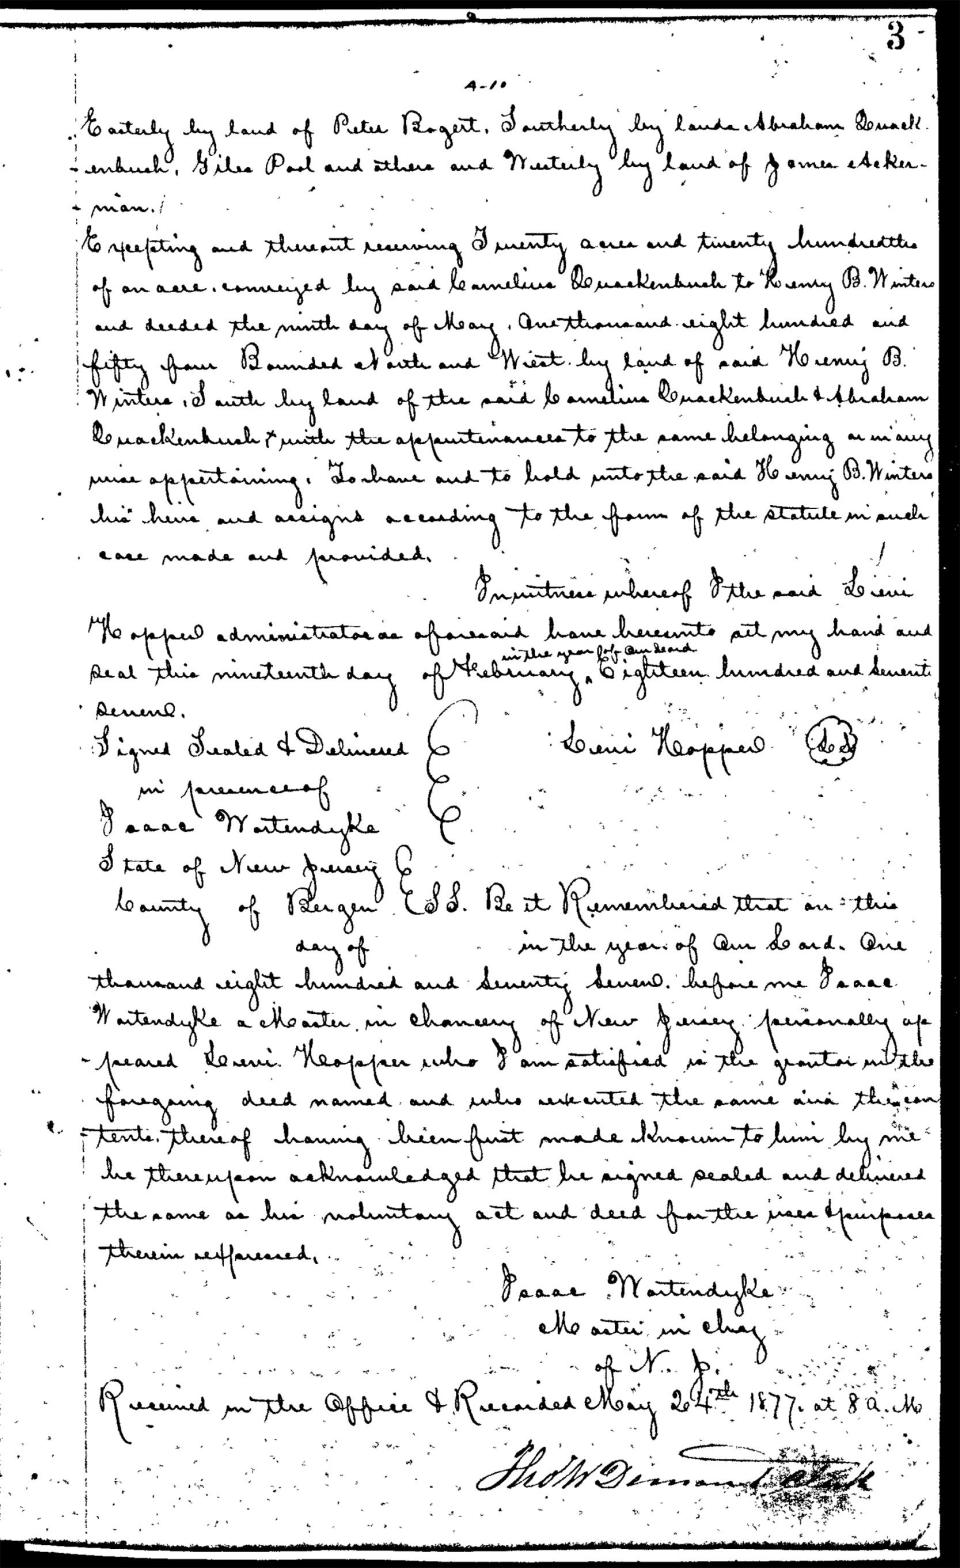 A scanned copy of a deed dating back from 1877.